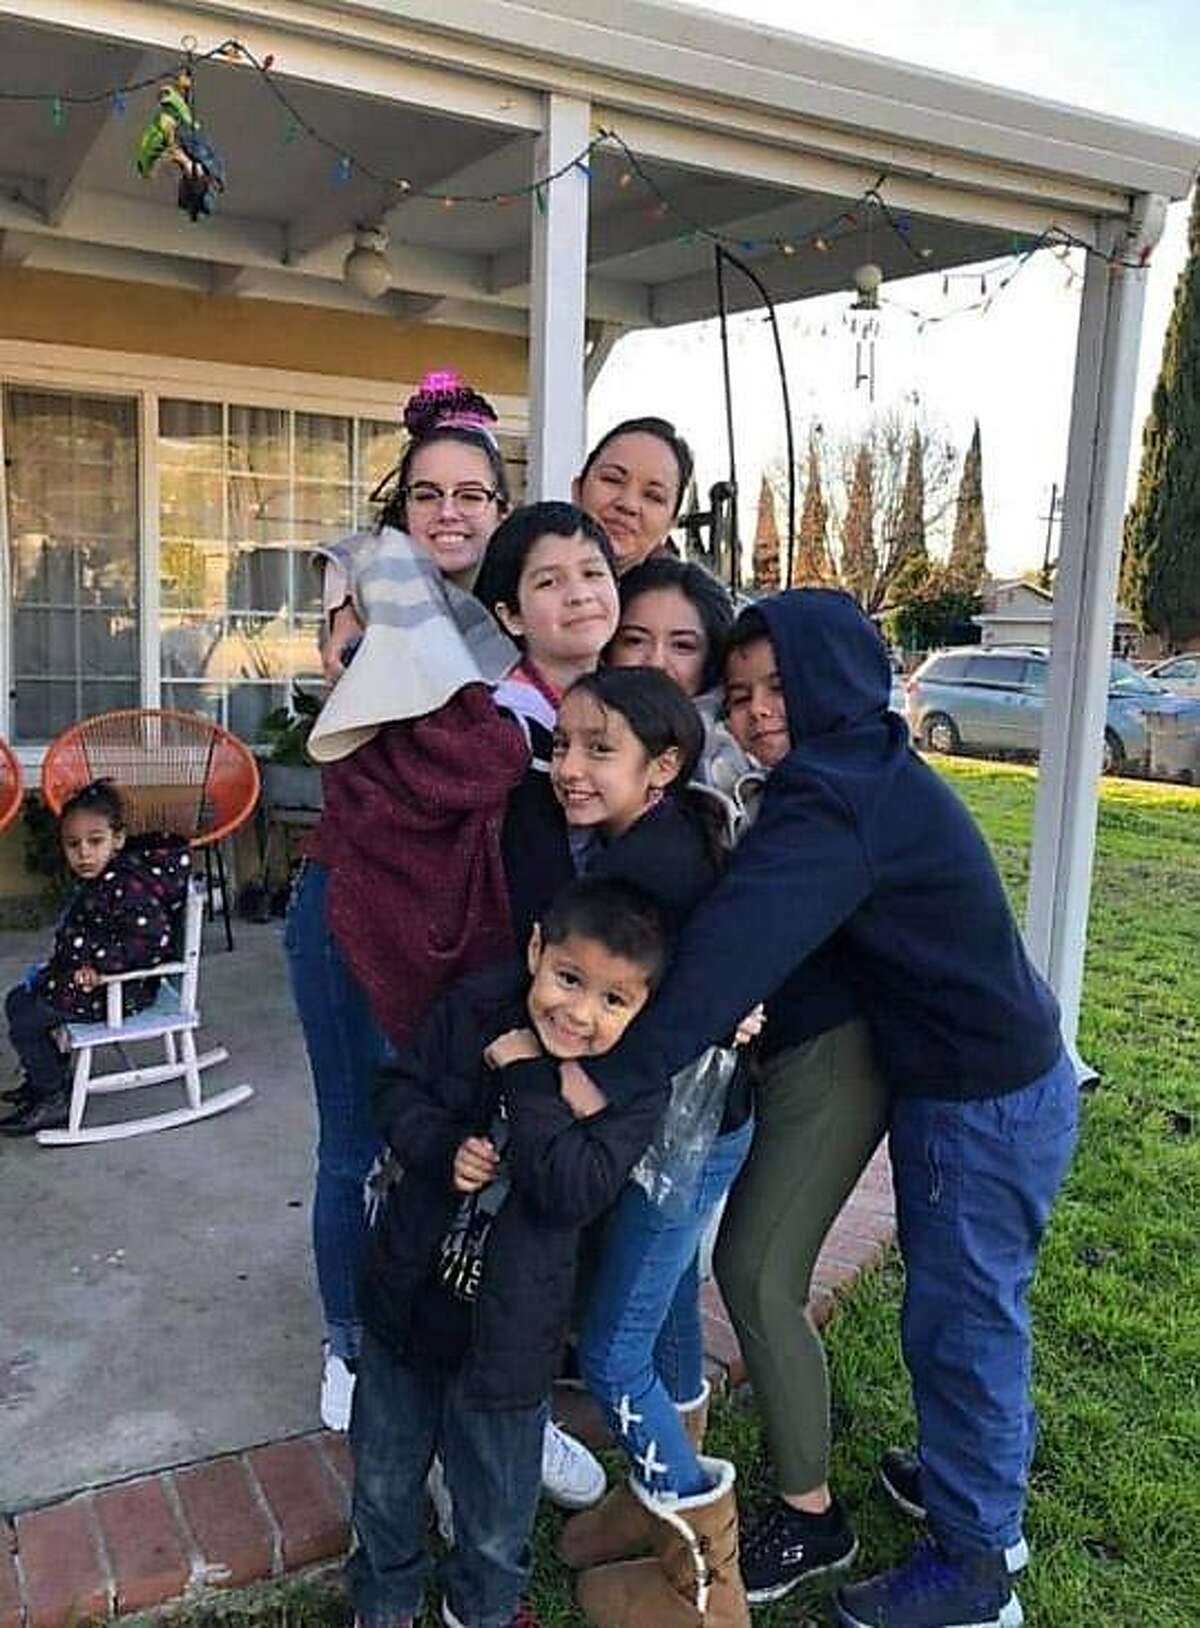 Gilroy Garlic Festival shooting victim Steven Romero, center bottom, in a family photo with his sister and cousins. Photo provided by Noe Romero.